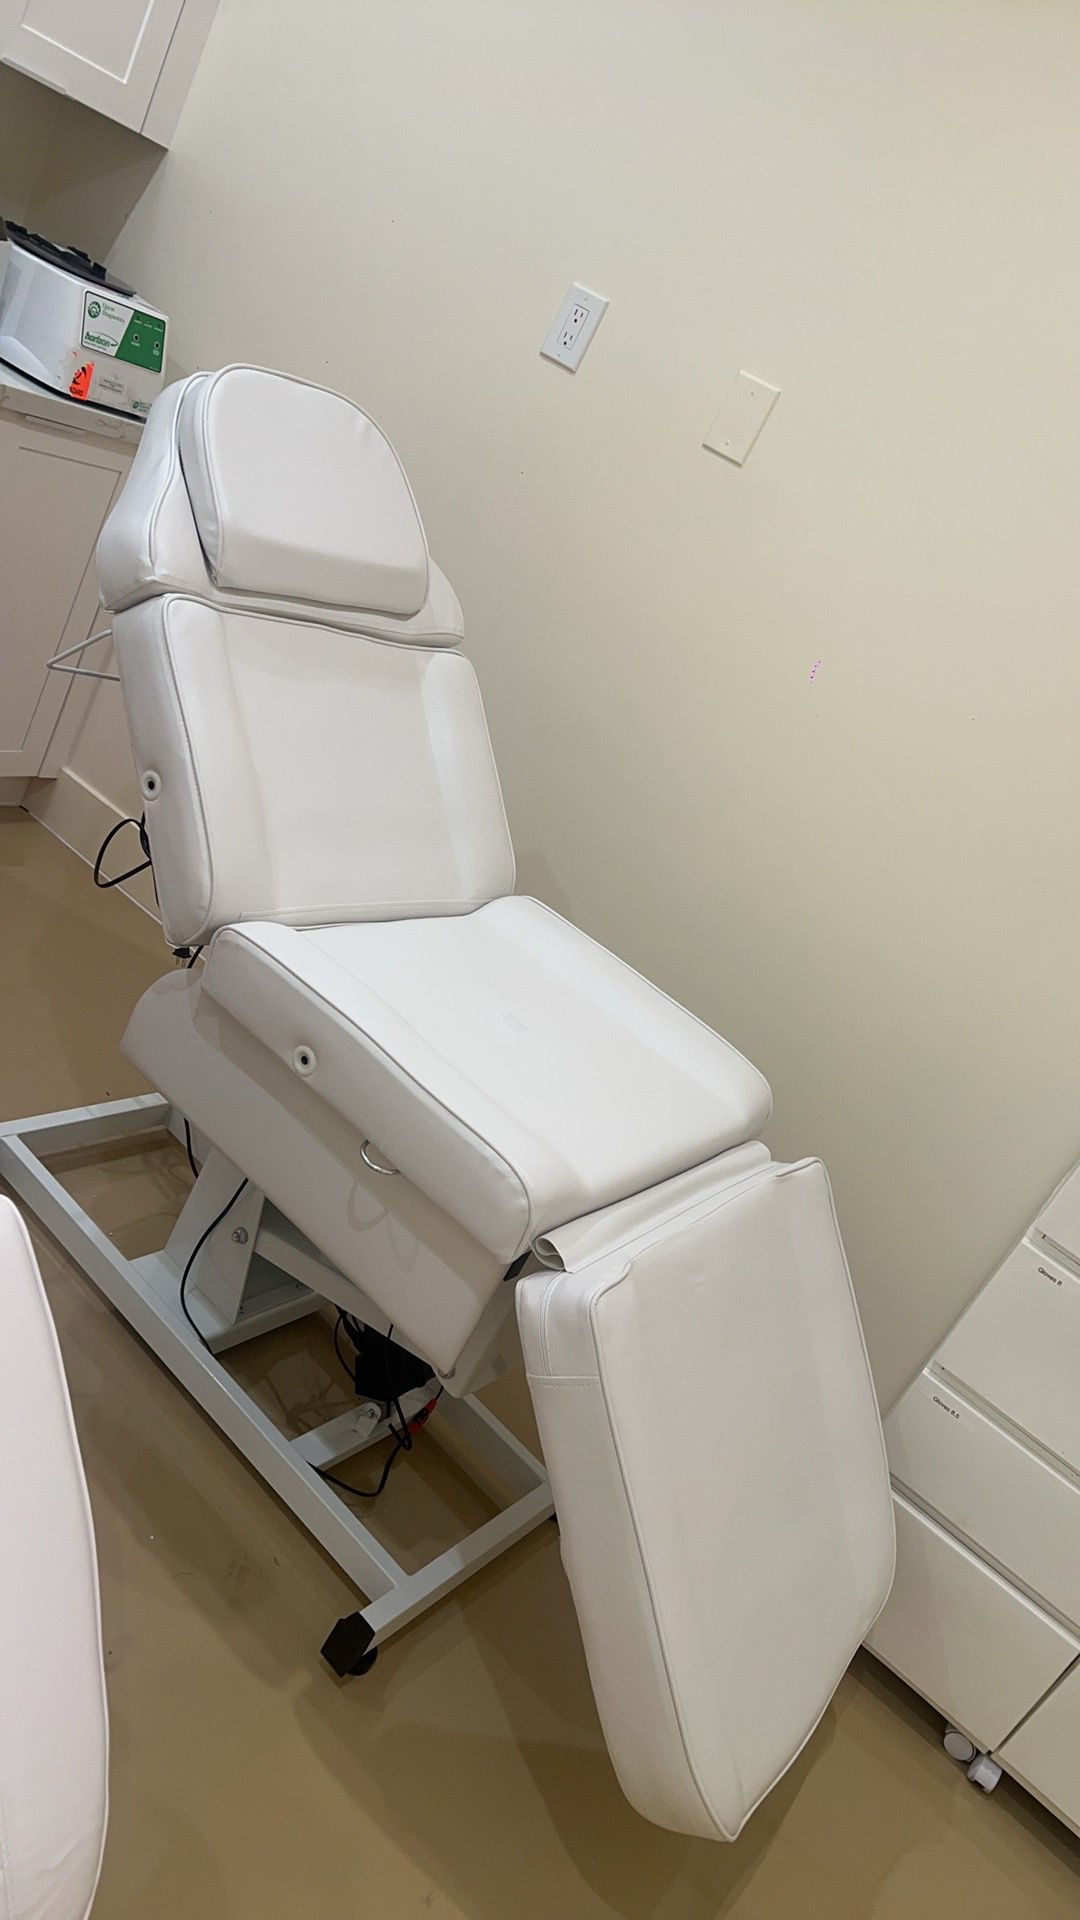 The injection chair and beauty bed are 90% new